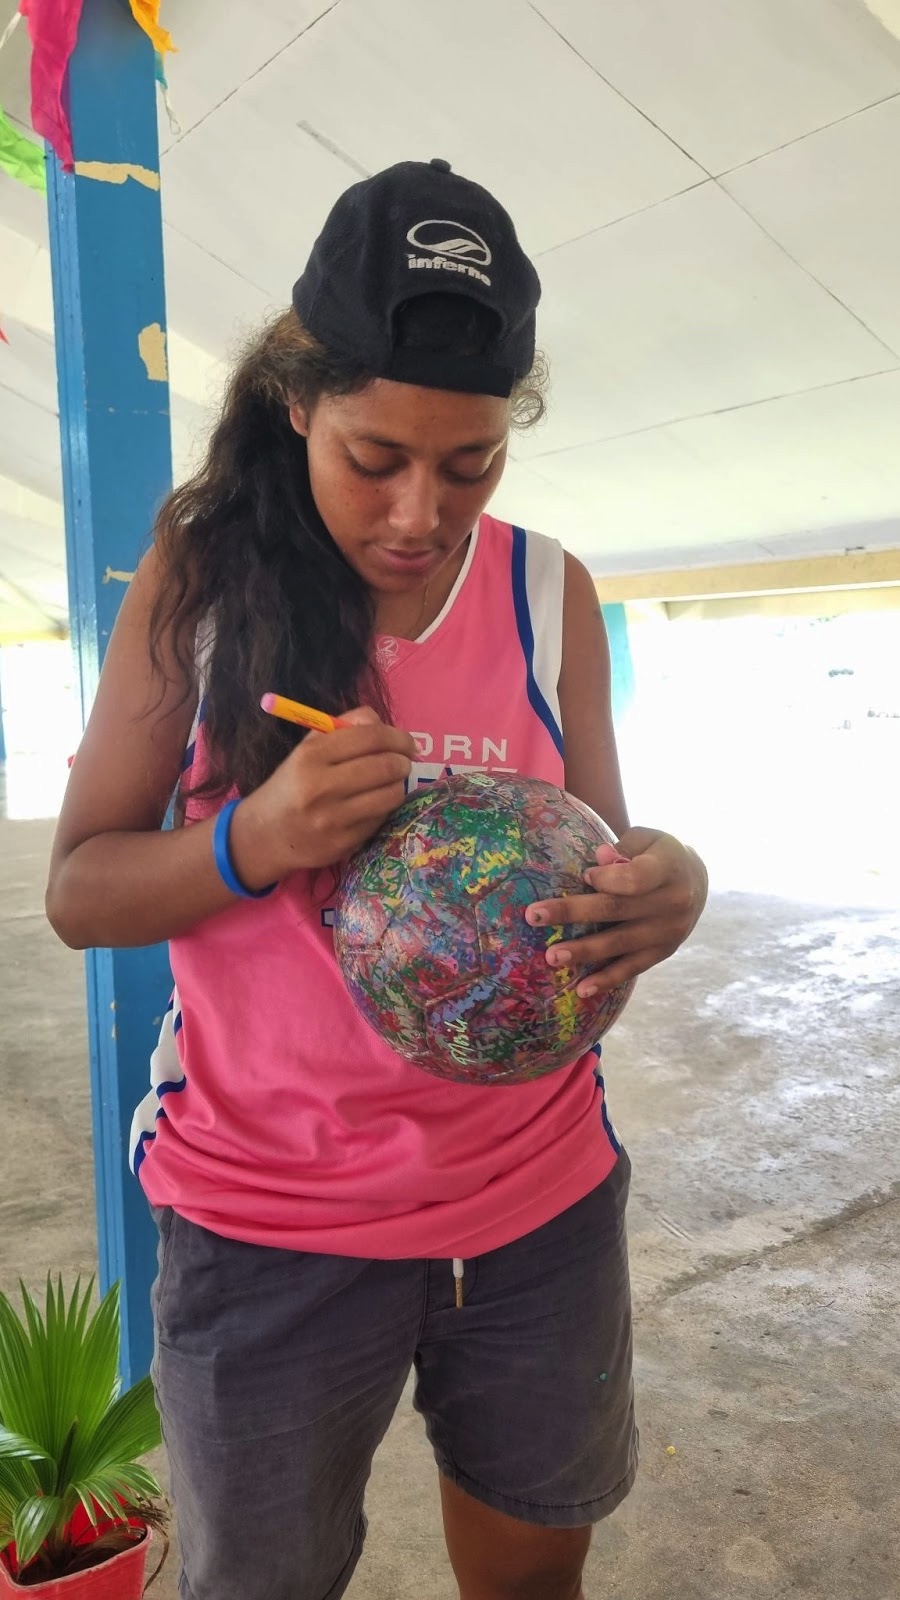 Betio girl signing the ball